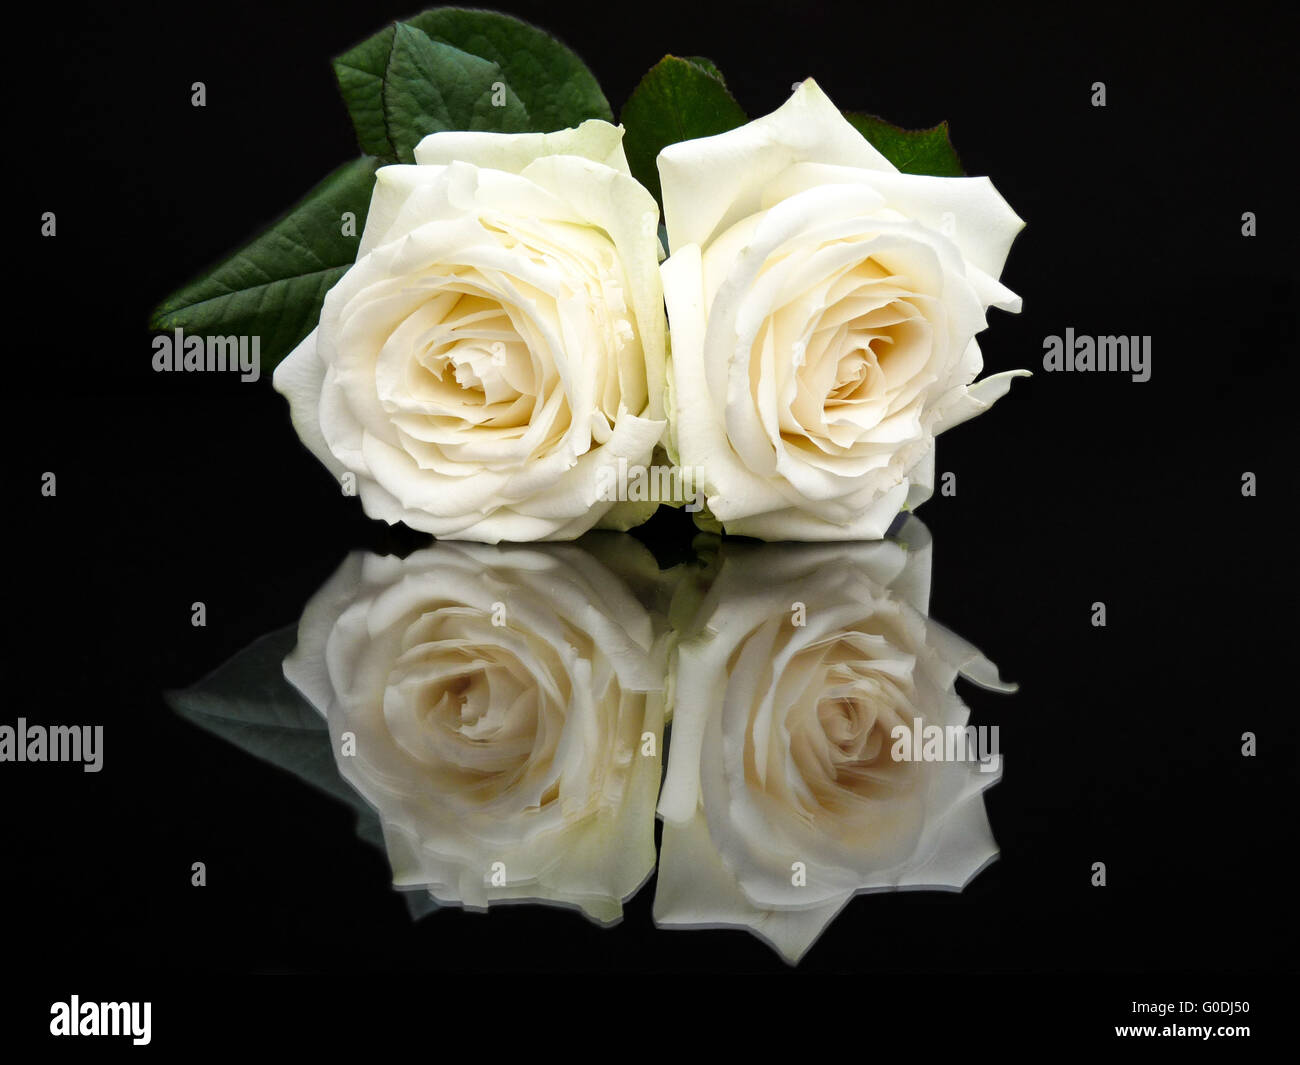 Two white roses with mirror image on black Stock Photo